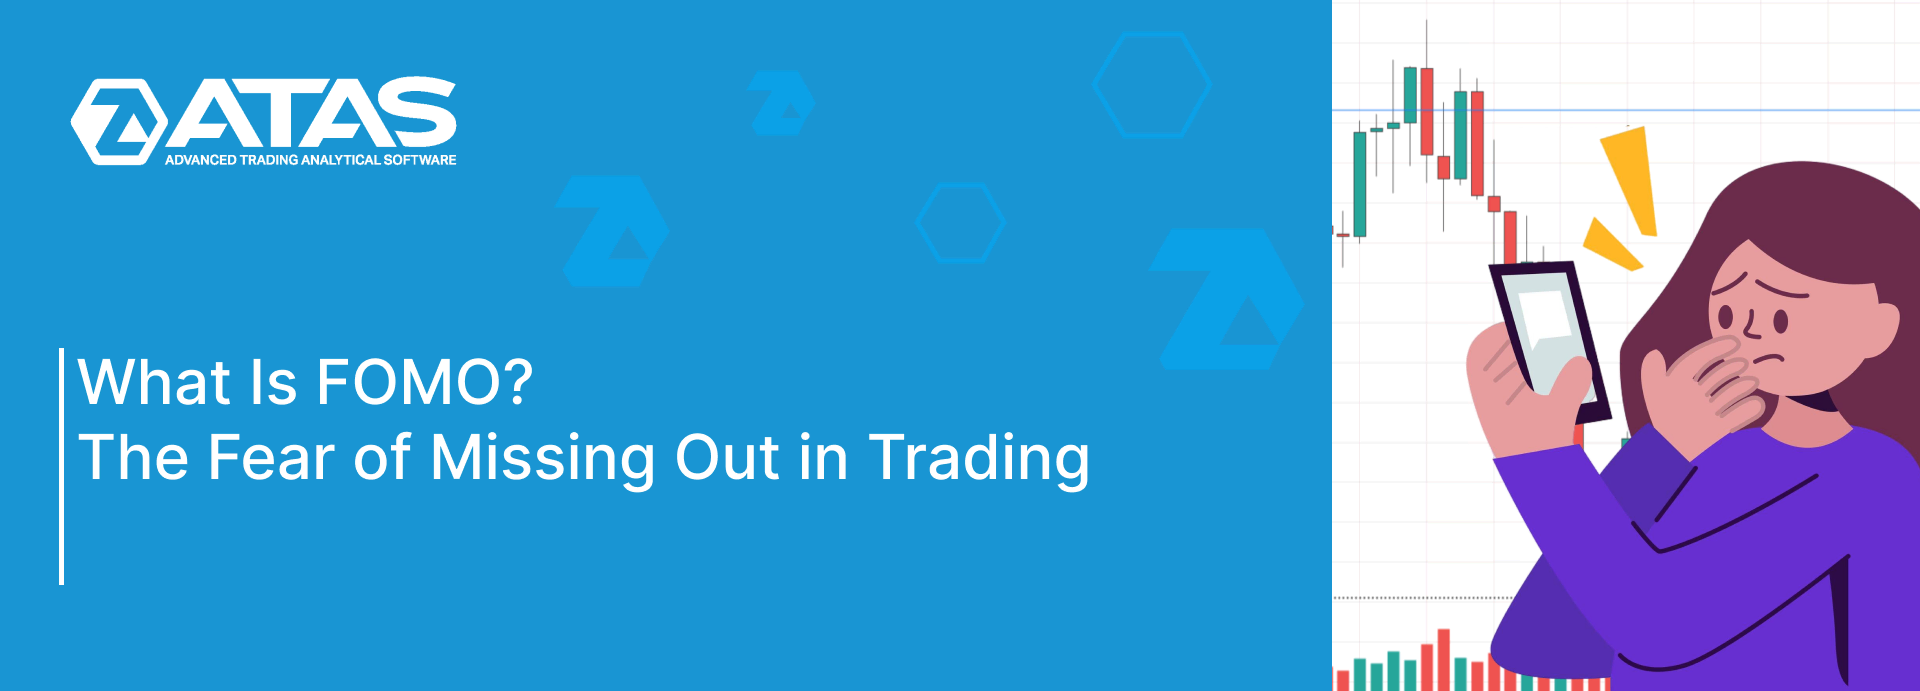 The Fear of Missing Out in Trading